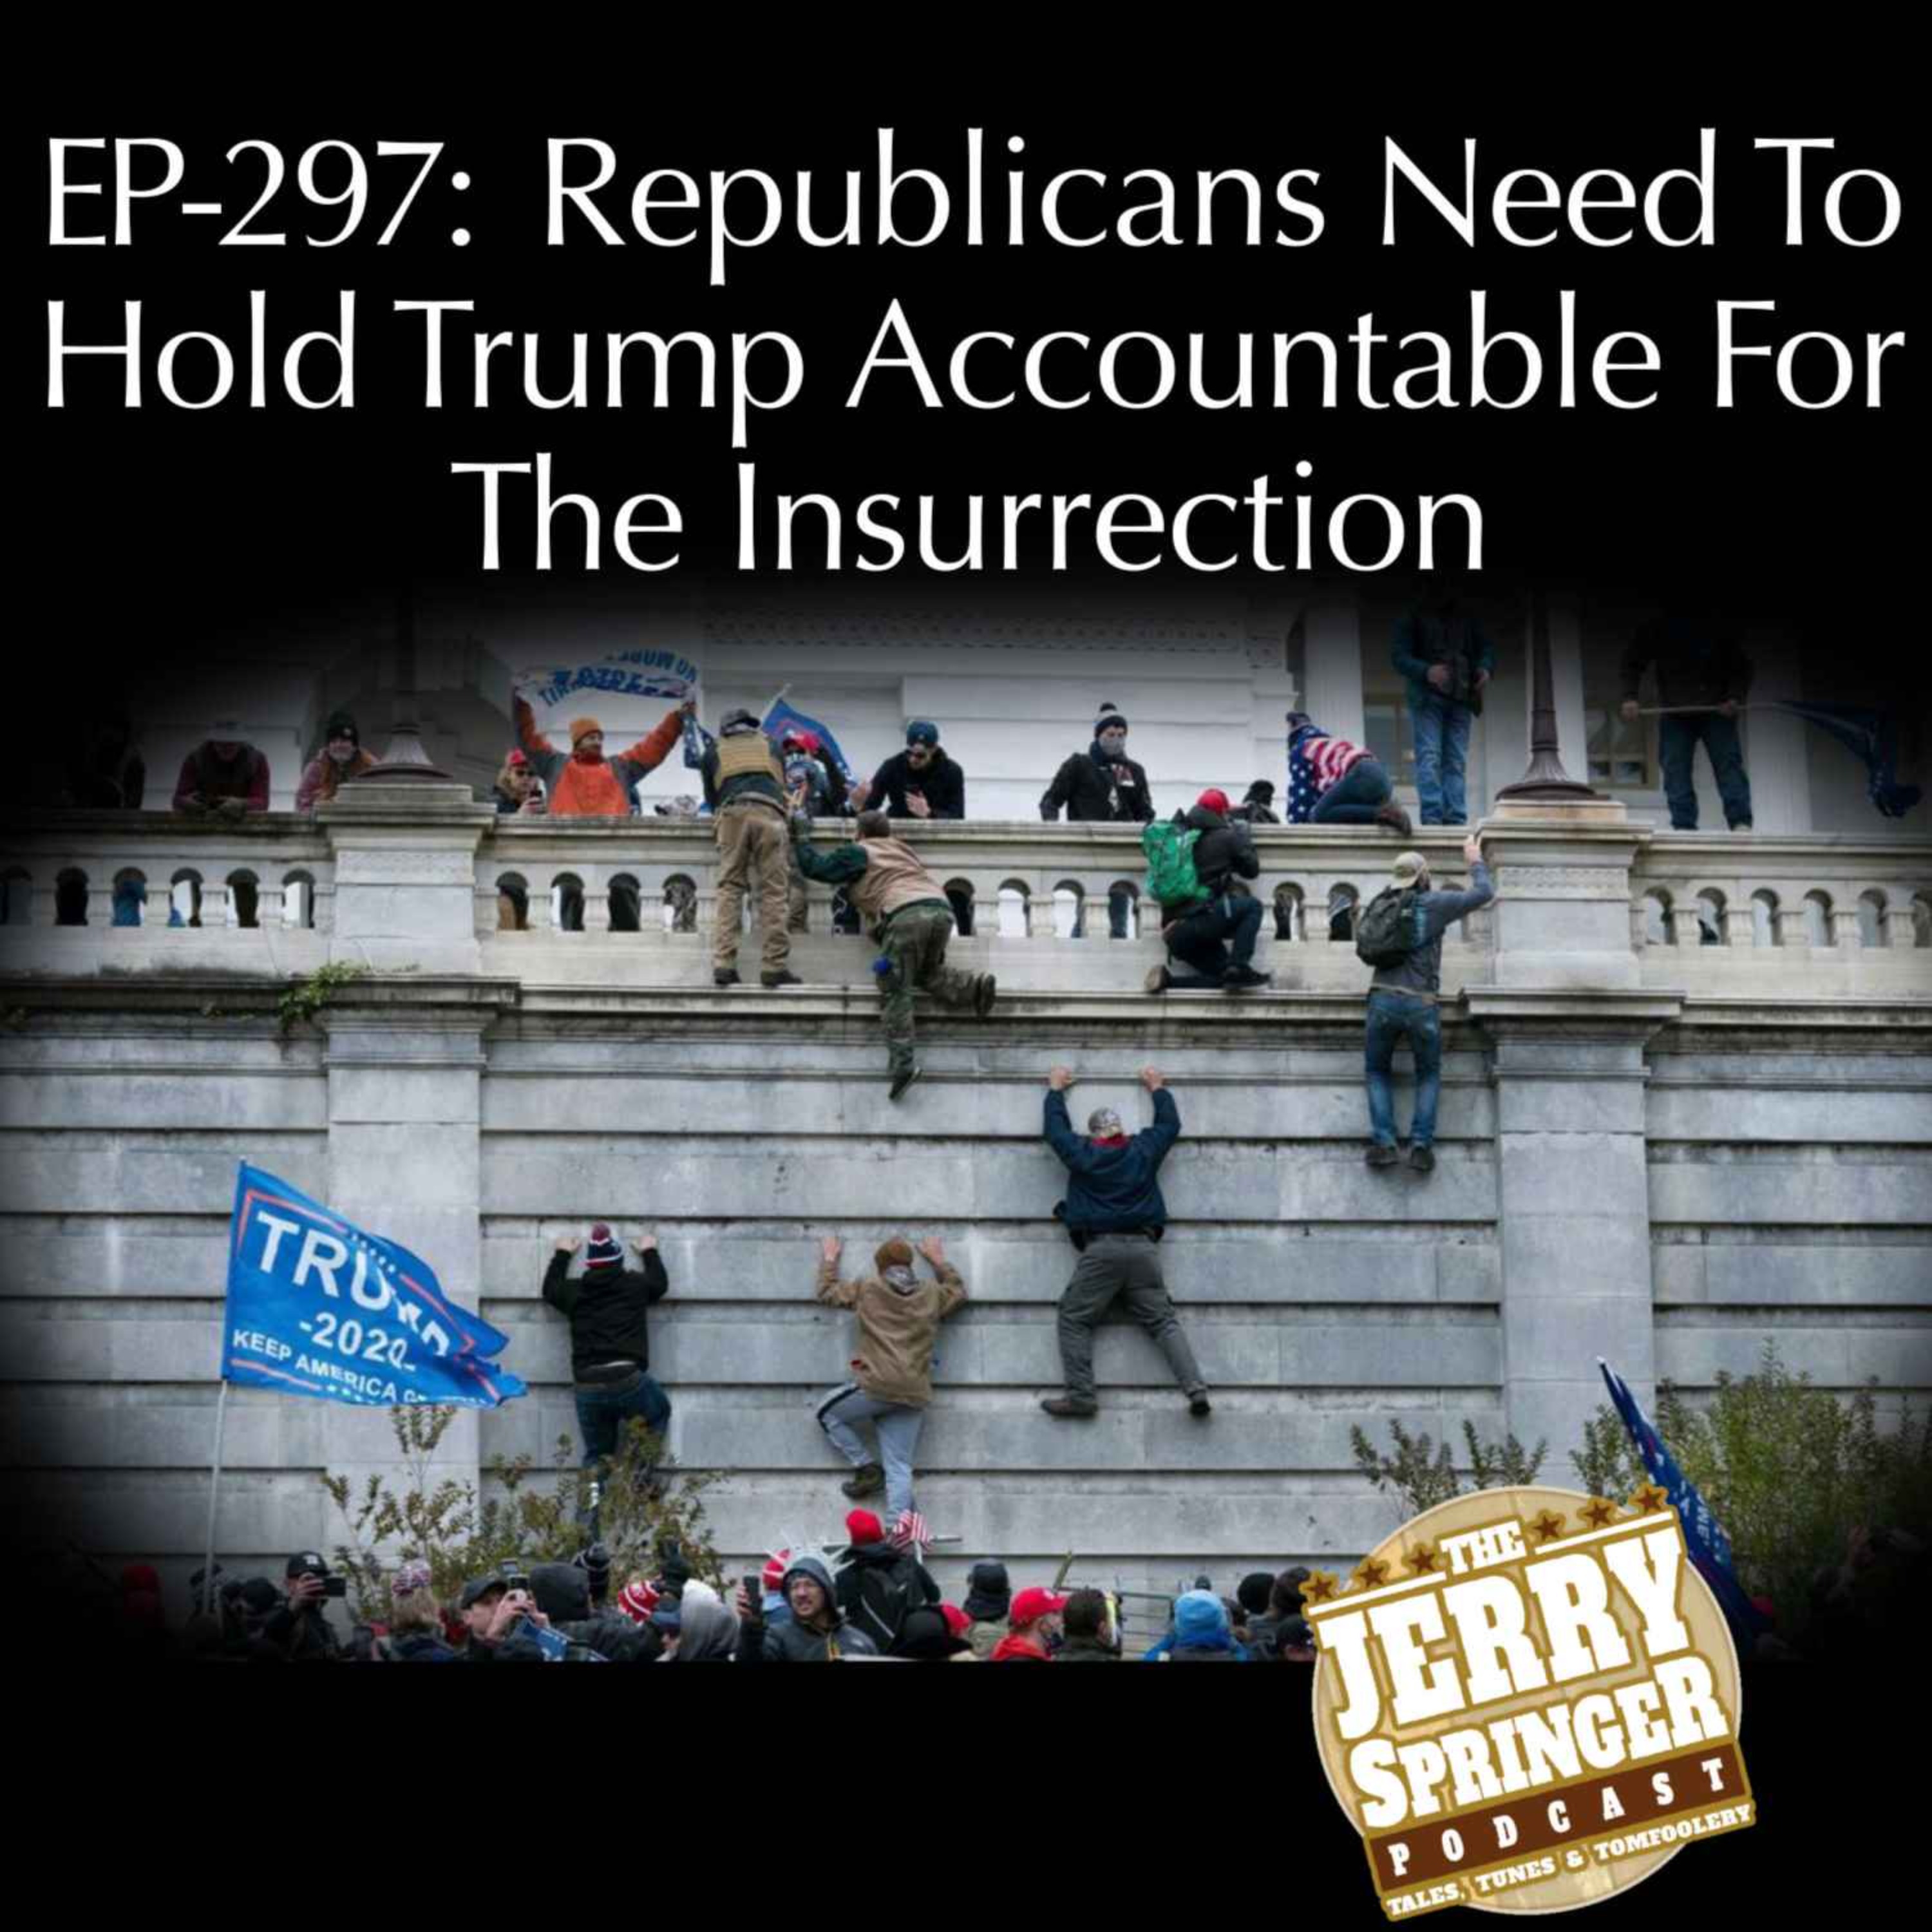 Republicans Need To Hold Trump Accountable For The Insurrection: EP-297